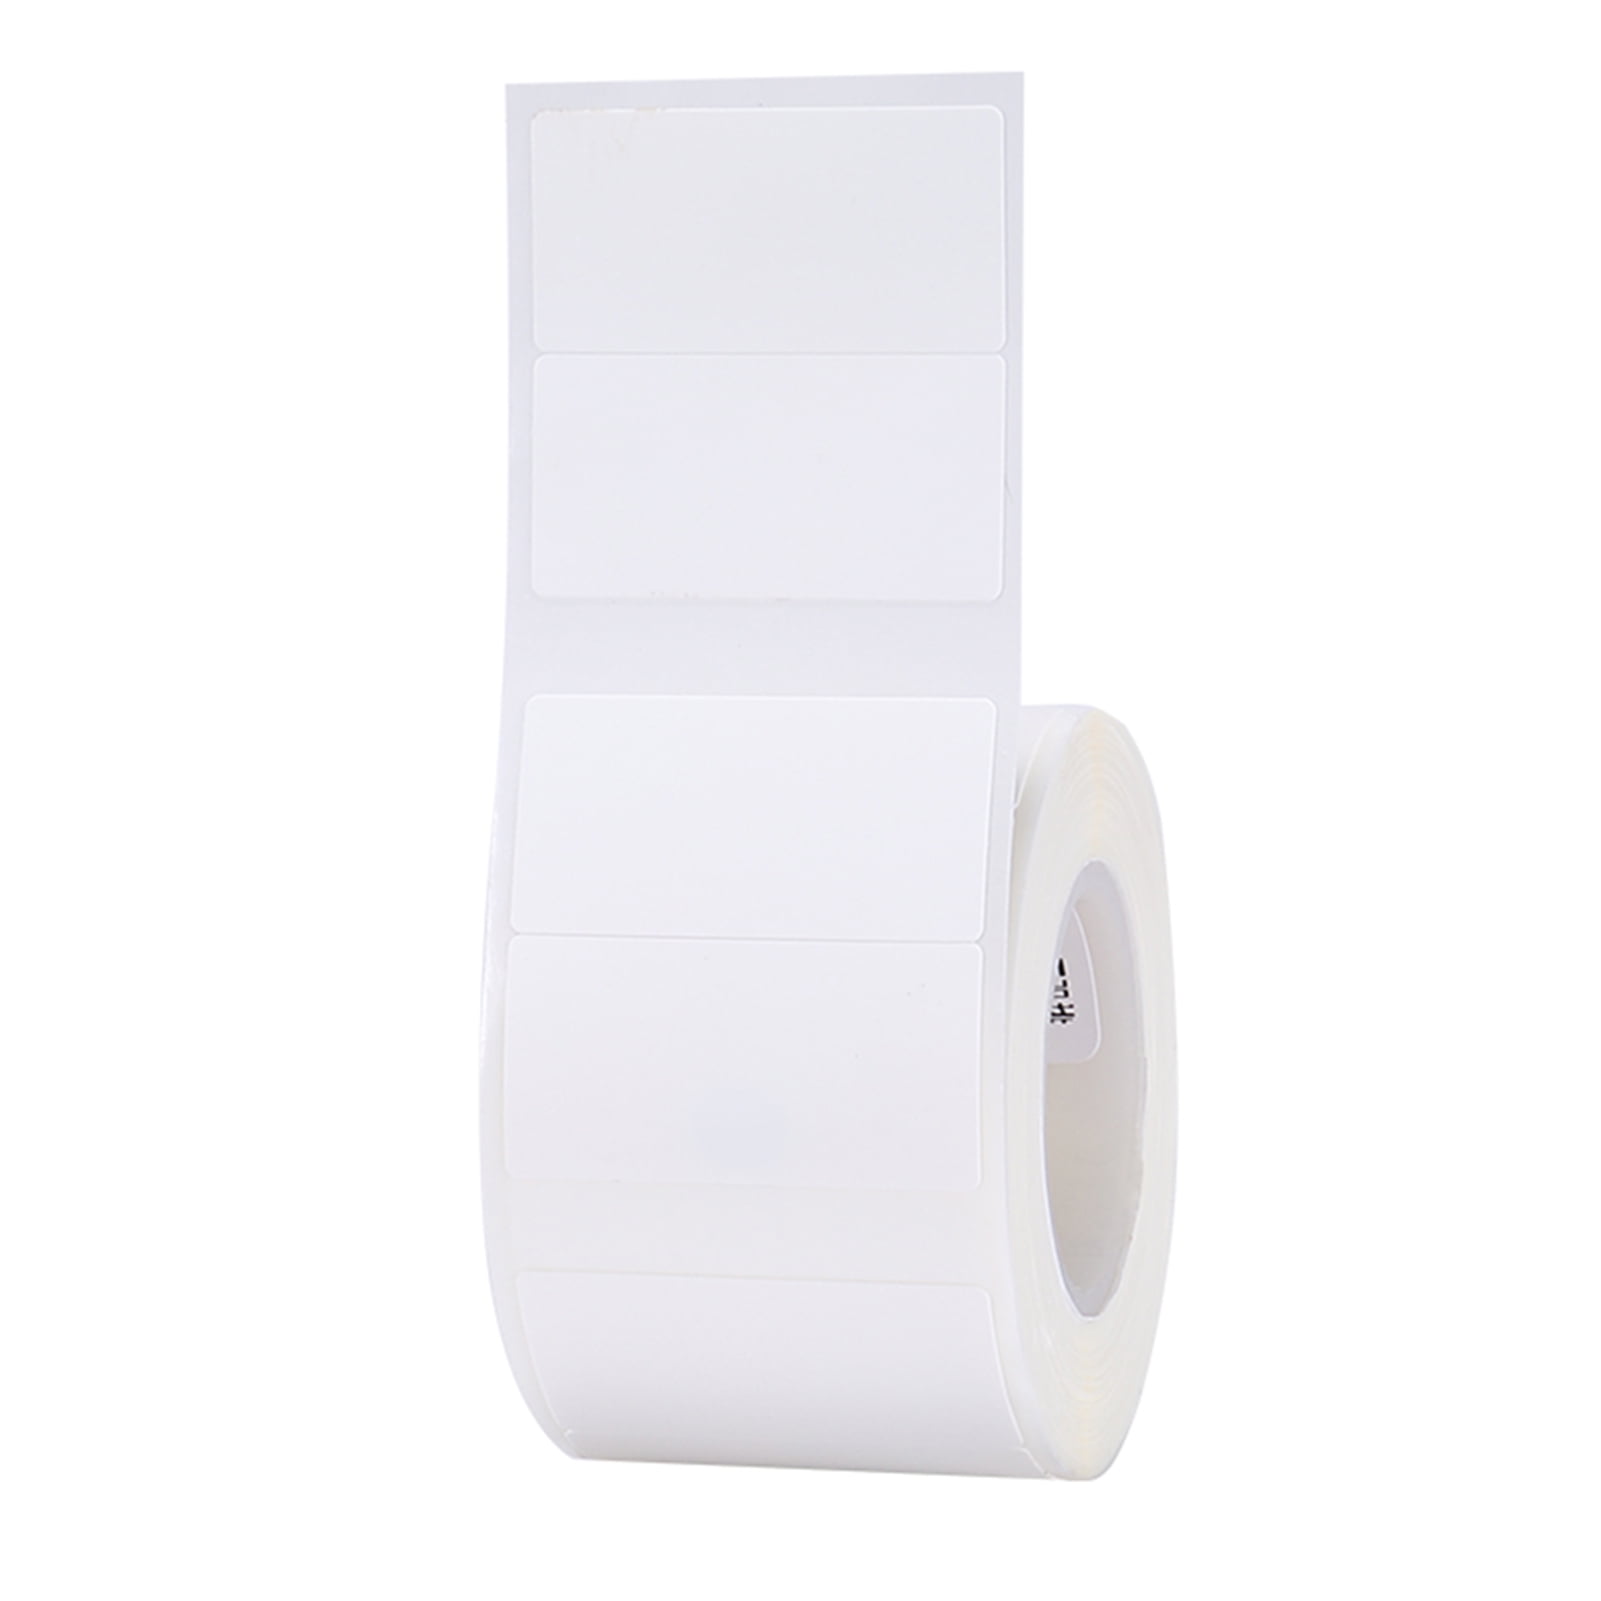 25mm x 15mm WHITE Direct Thermal Labels 2,500 per roll for Zebra type printer 